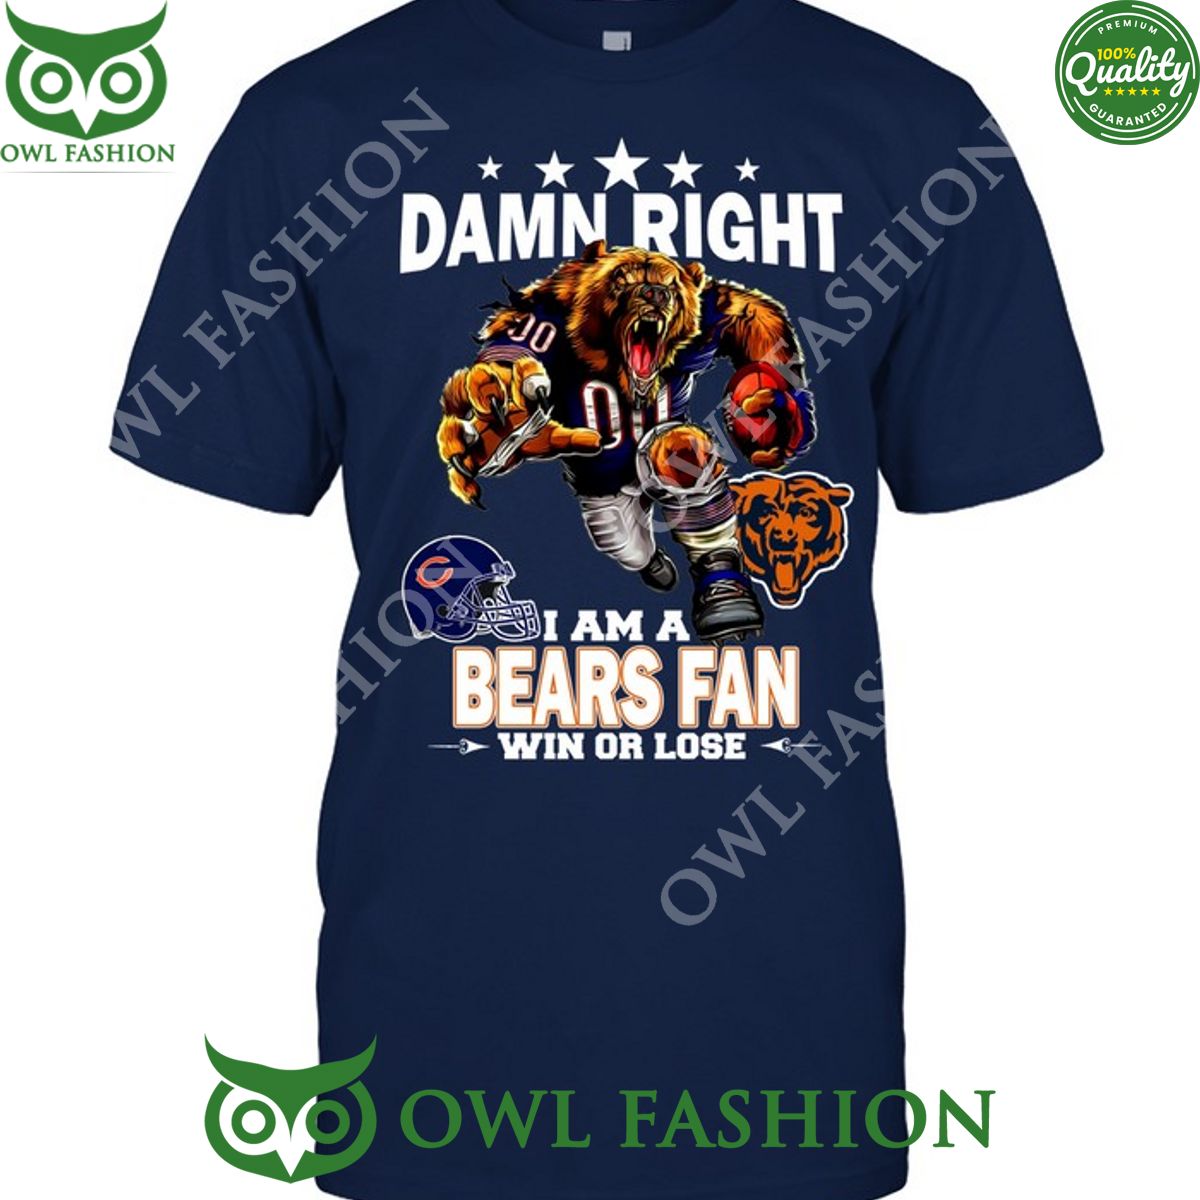 Damn Right Chicago Bears NFL Fan Win or lose t shirt